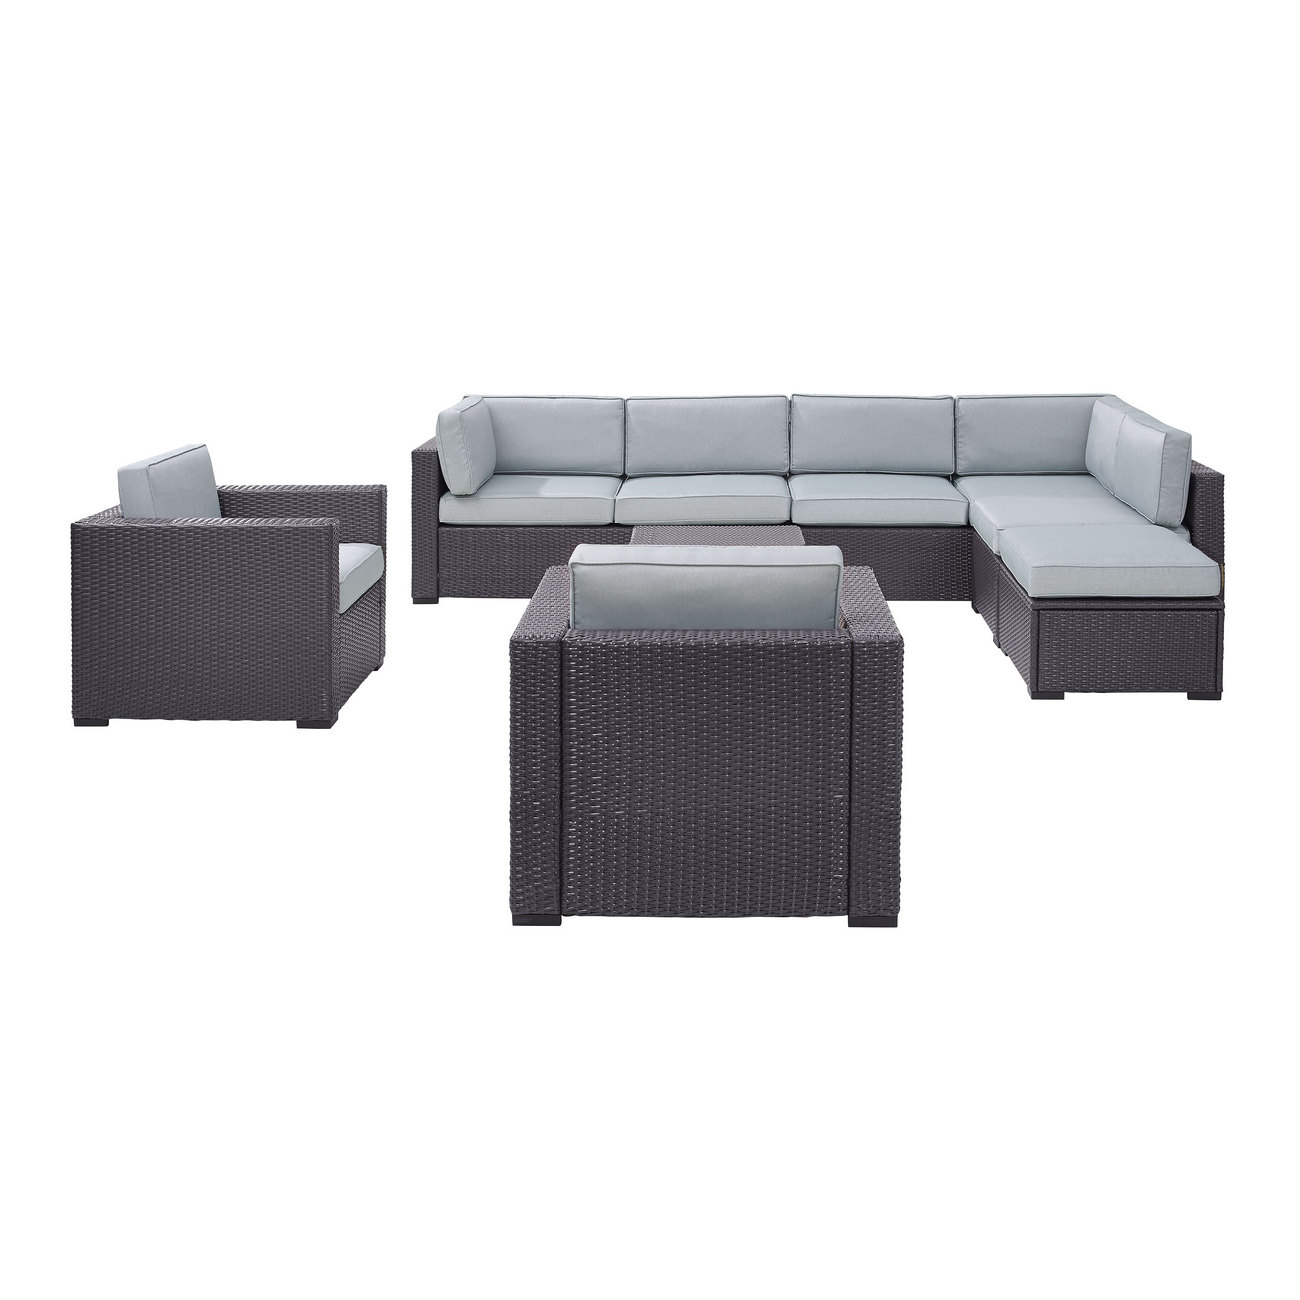 Outdoor Sectional Set Chair Coffee Table Ottoman Loveseats Crosley